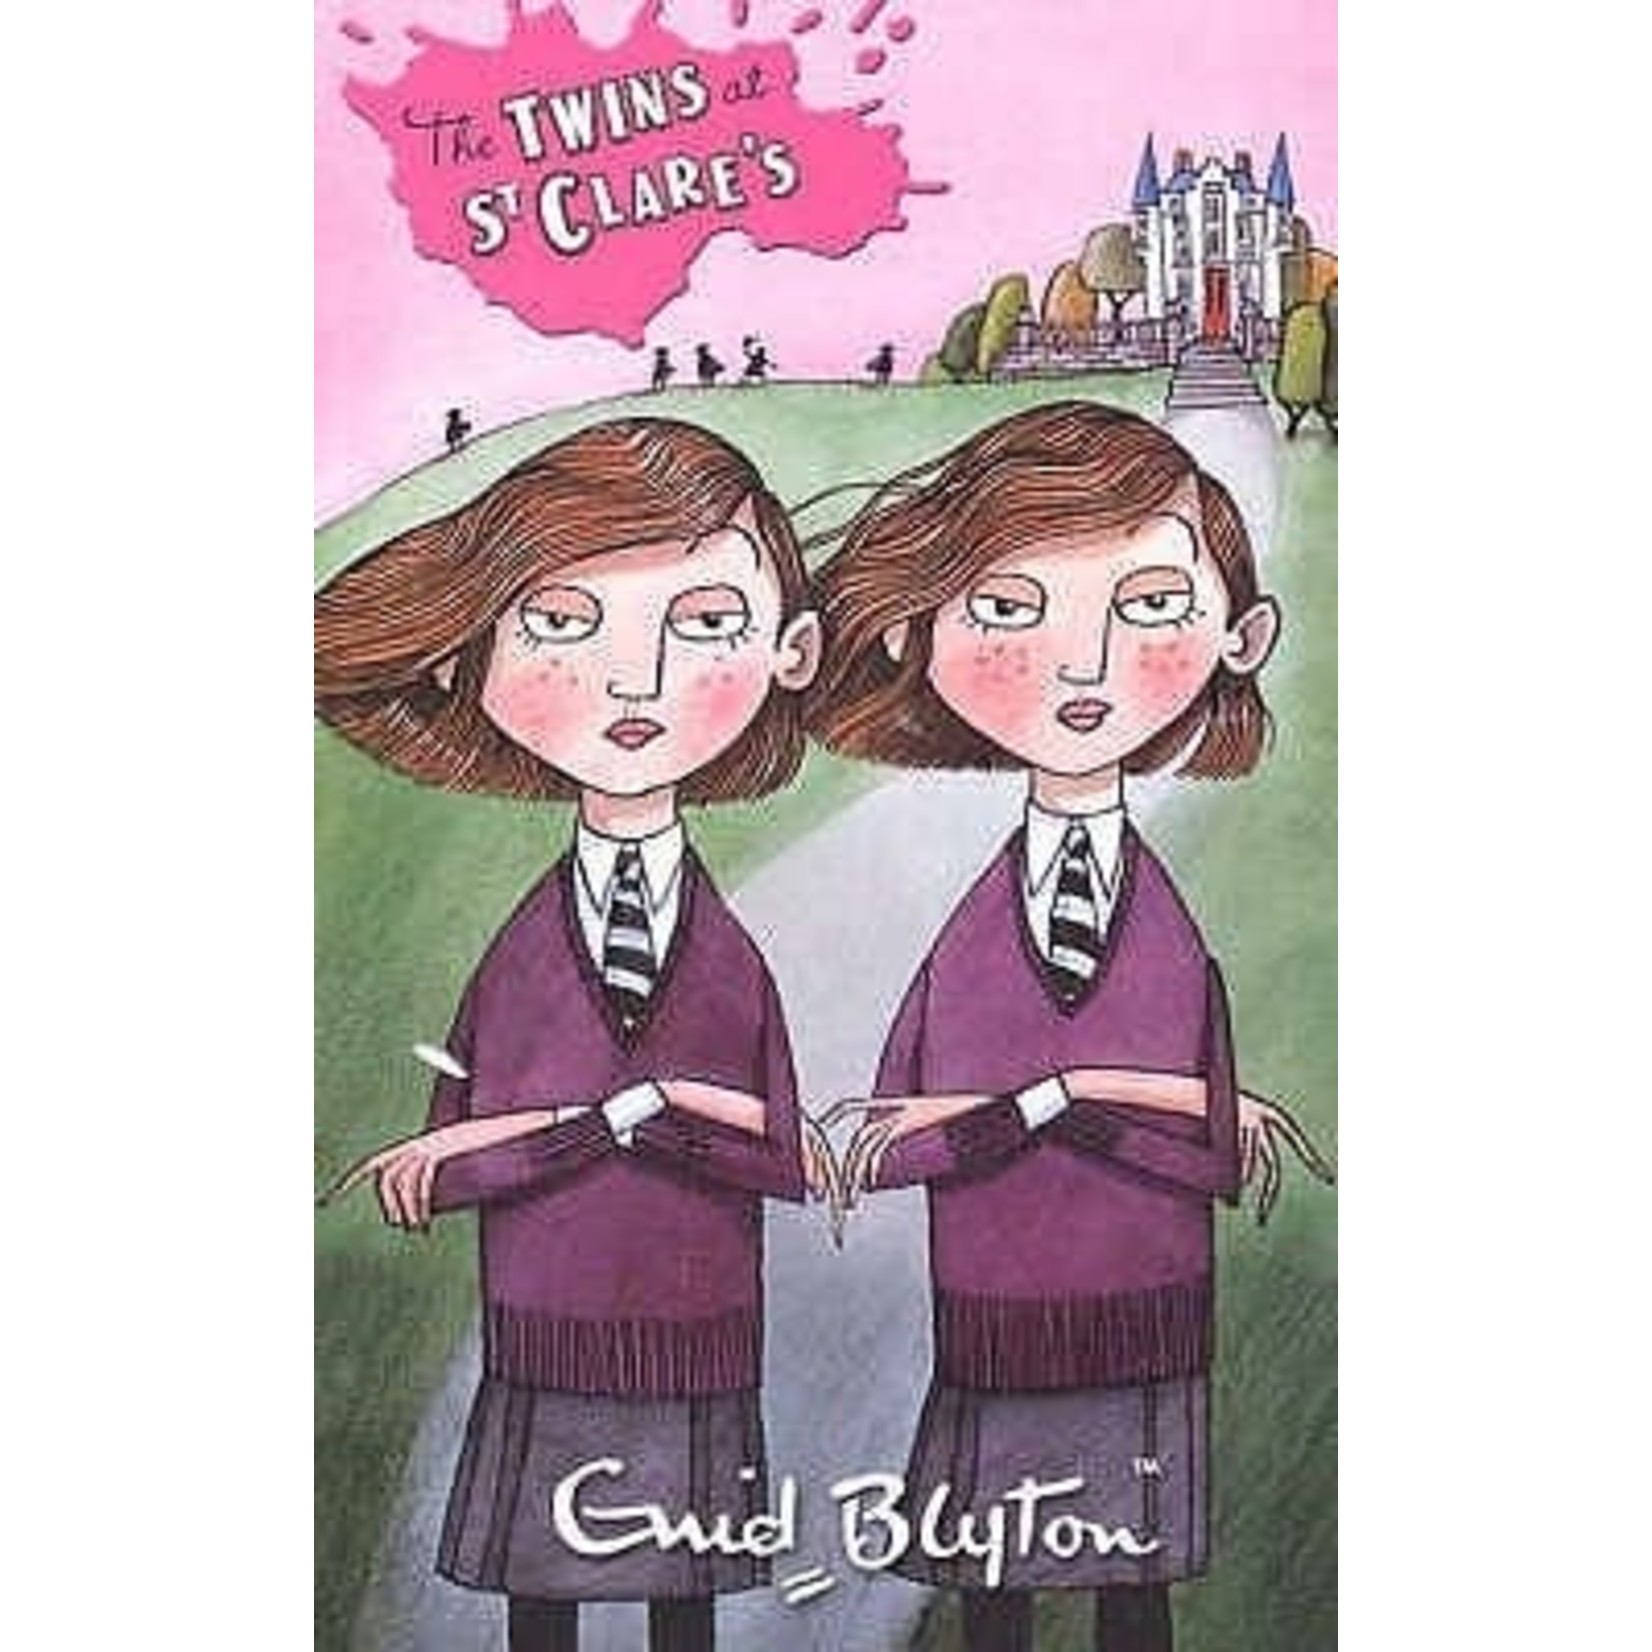 Enid Blyton The Twins at St. Clare's